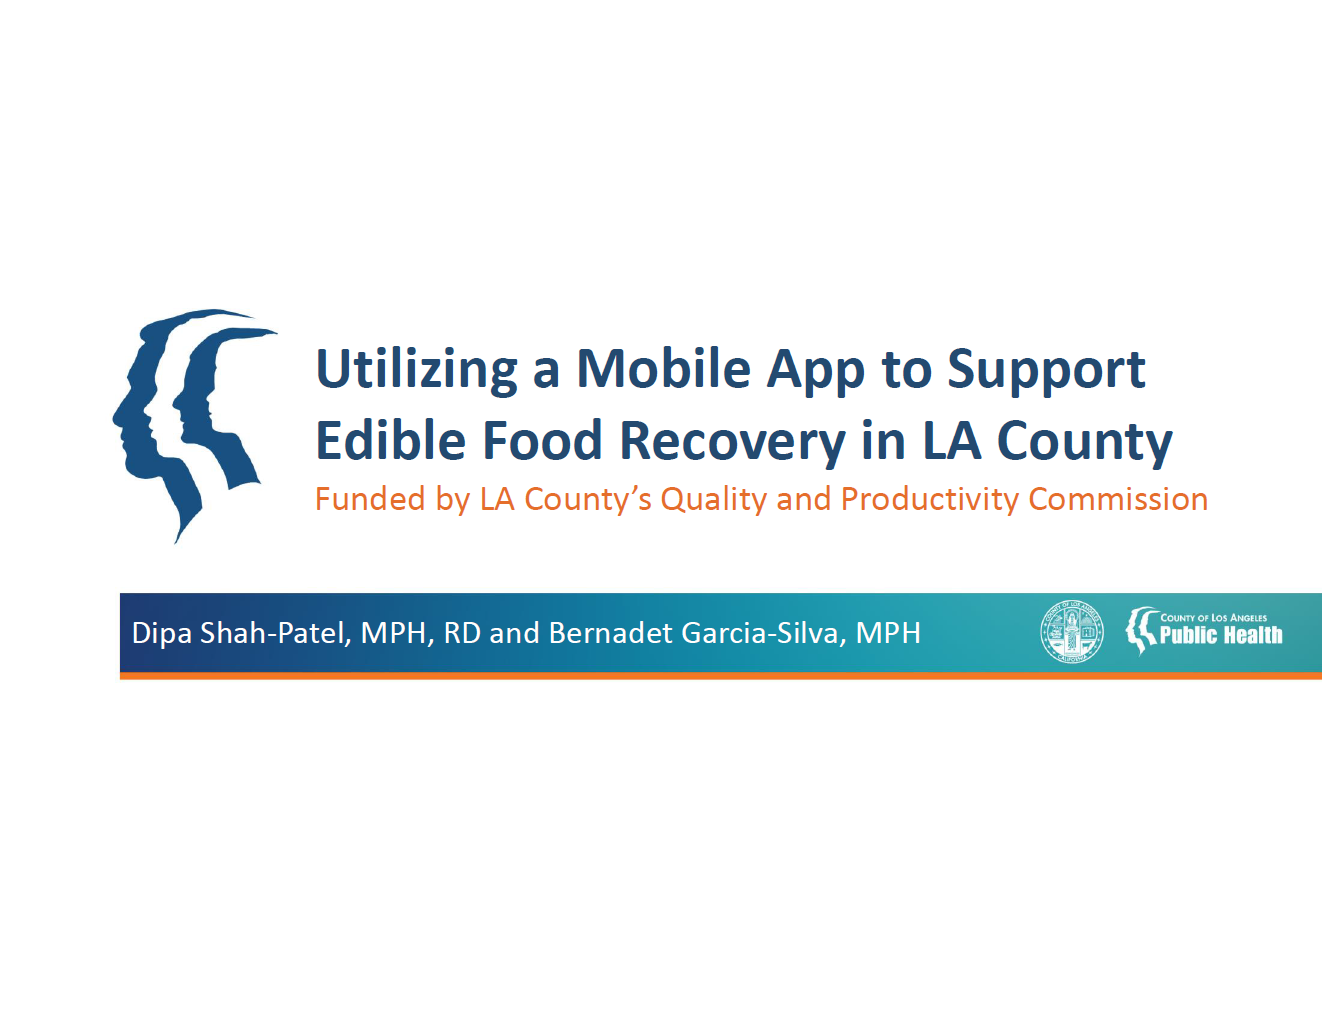 DPH Food Recovery Mobile App - Copia